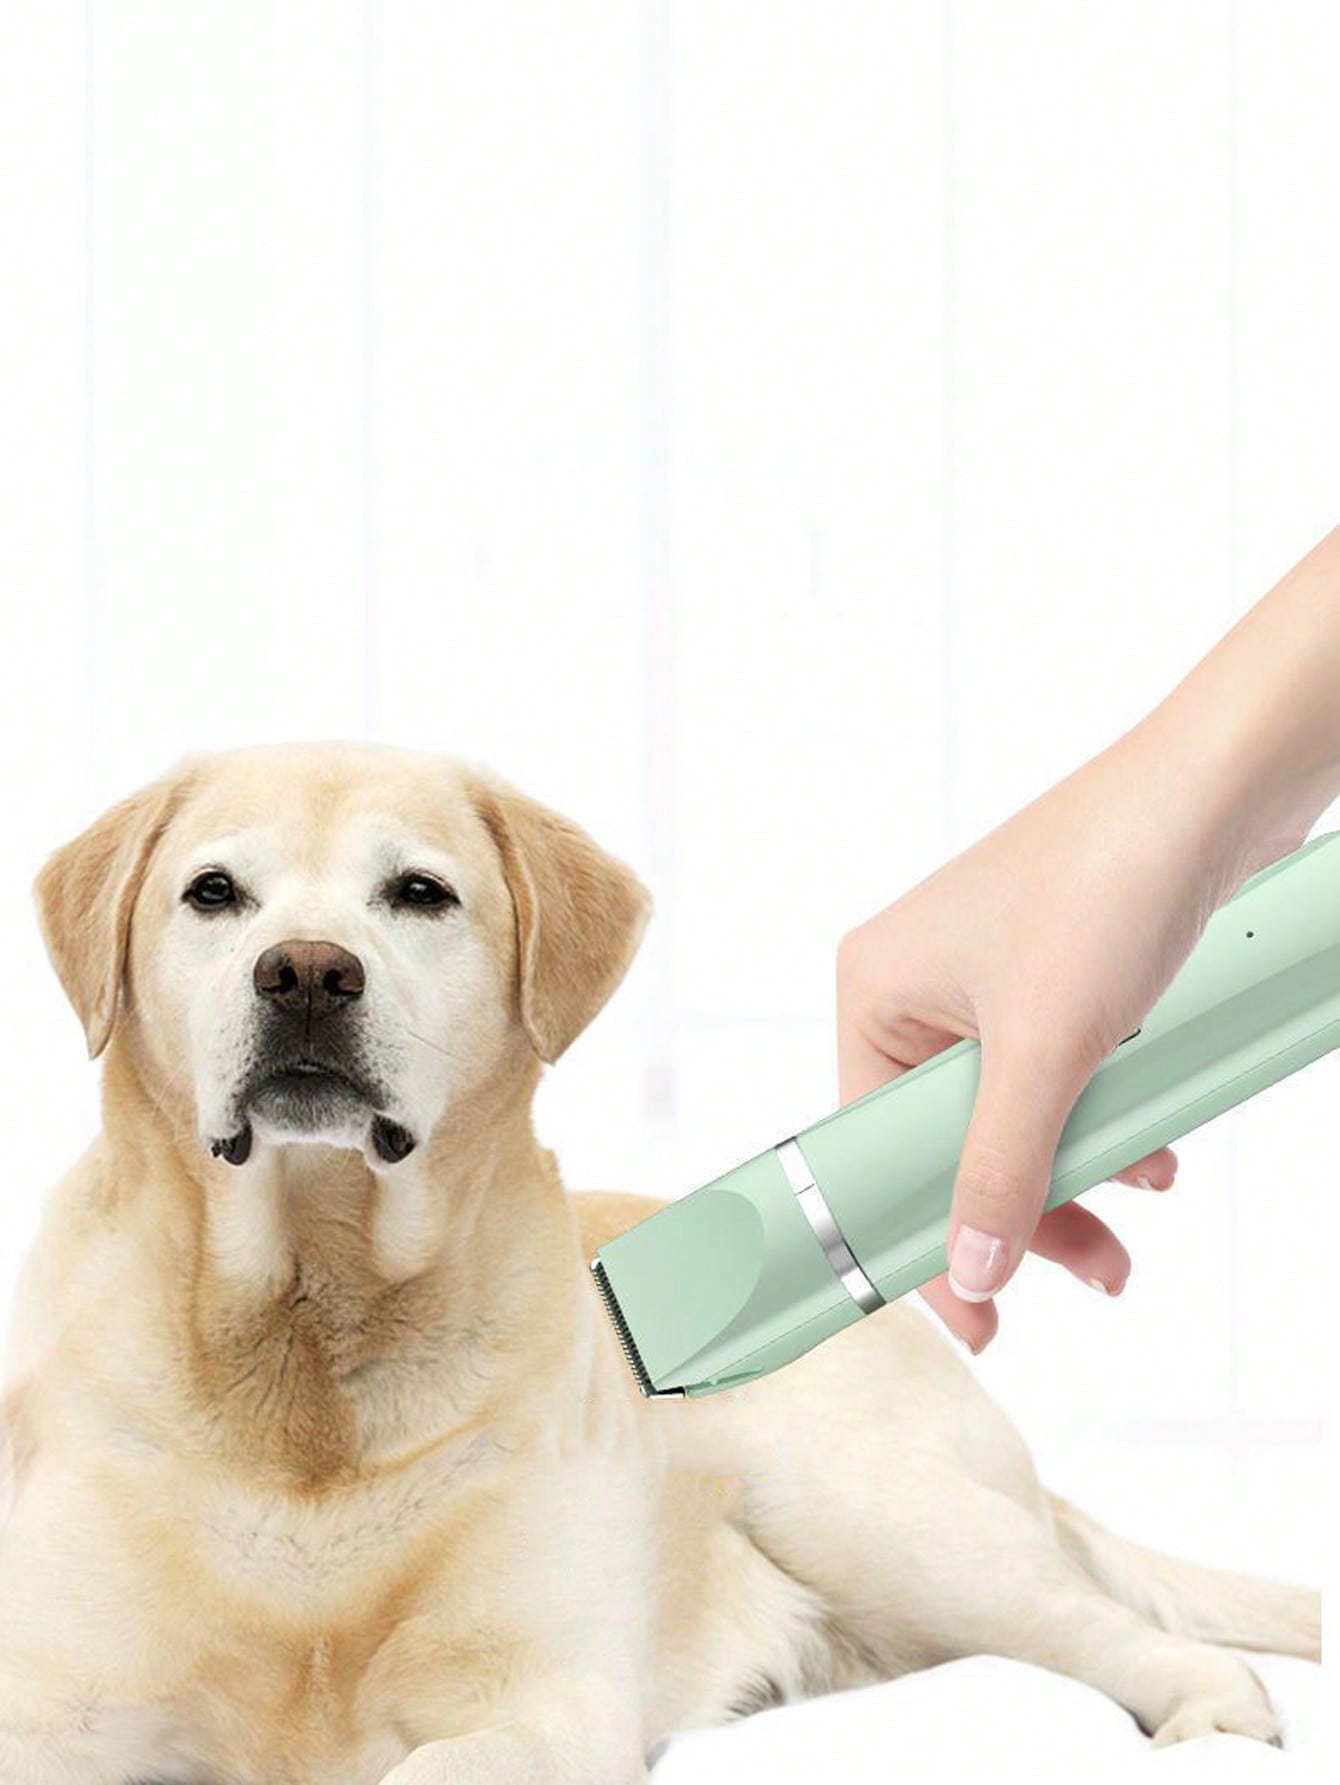 Pet Hair Clipper Electric Trimmer For Dogs And Cats, Foot Hair Trimming, Beauty Tool